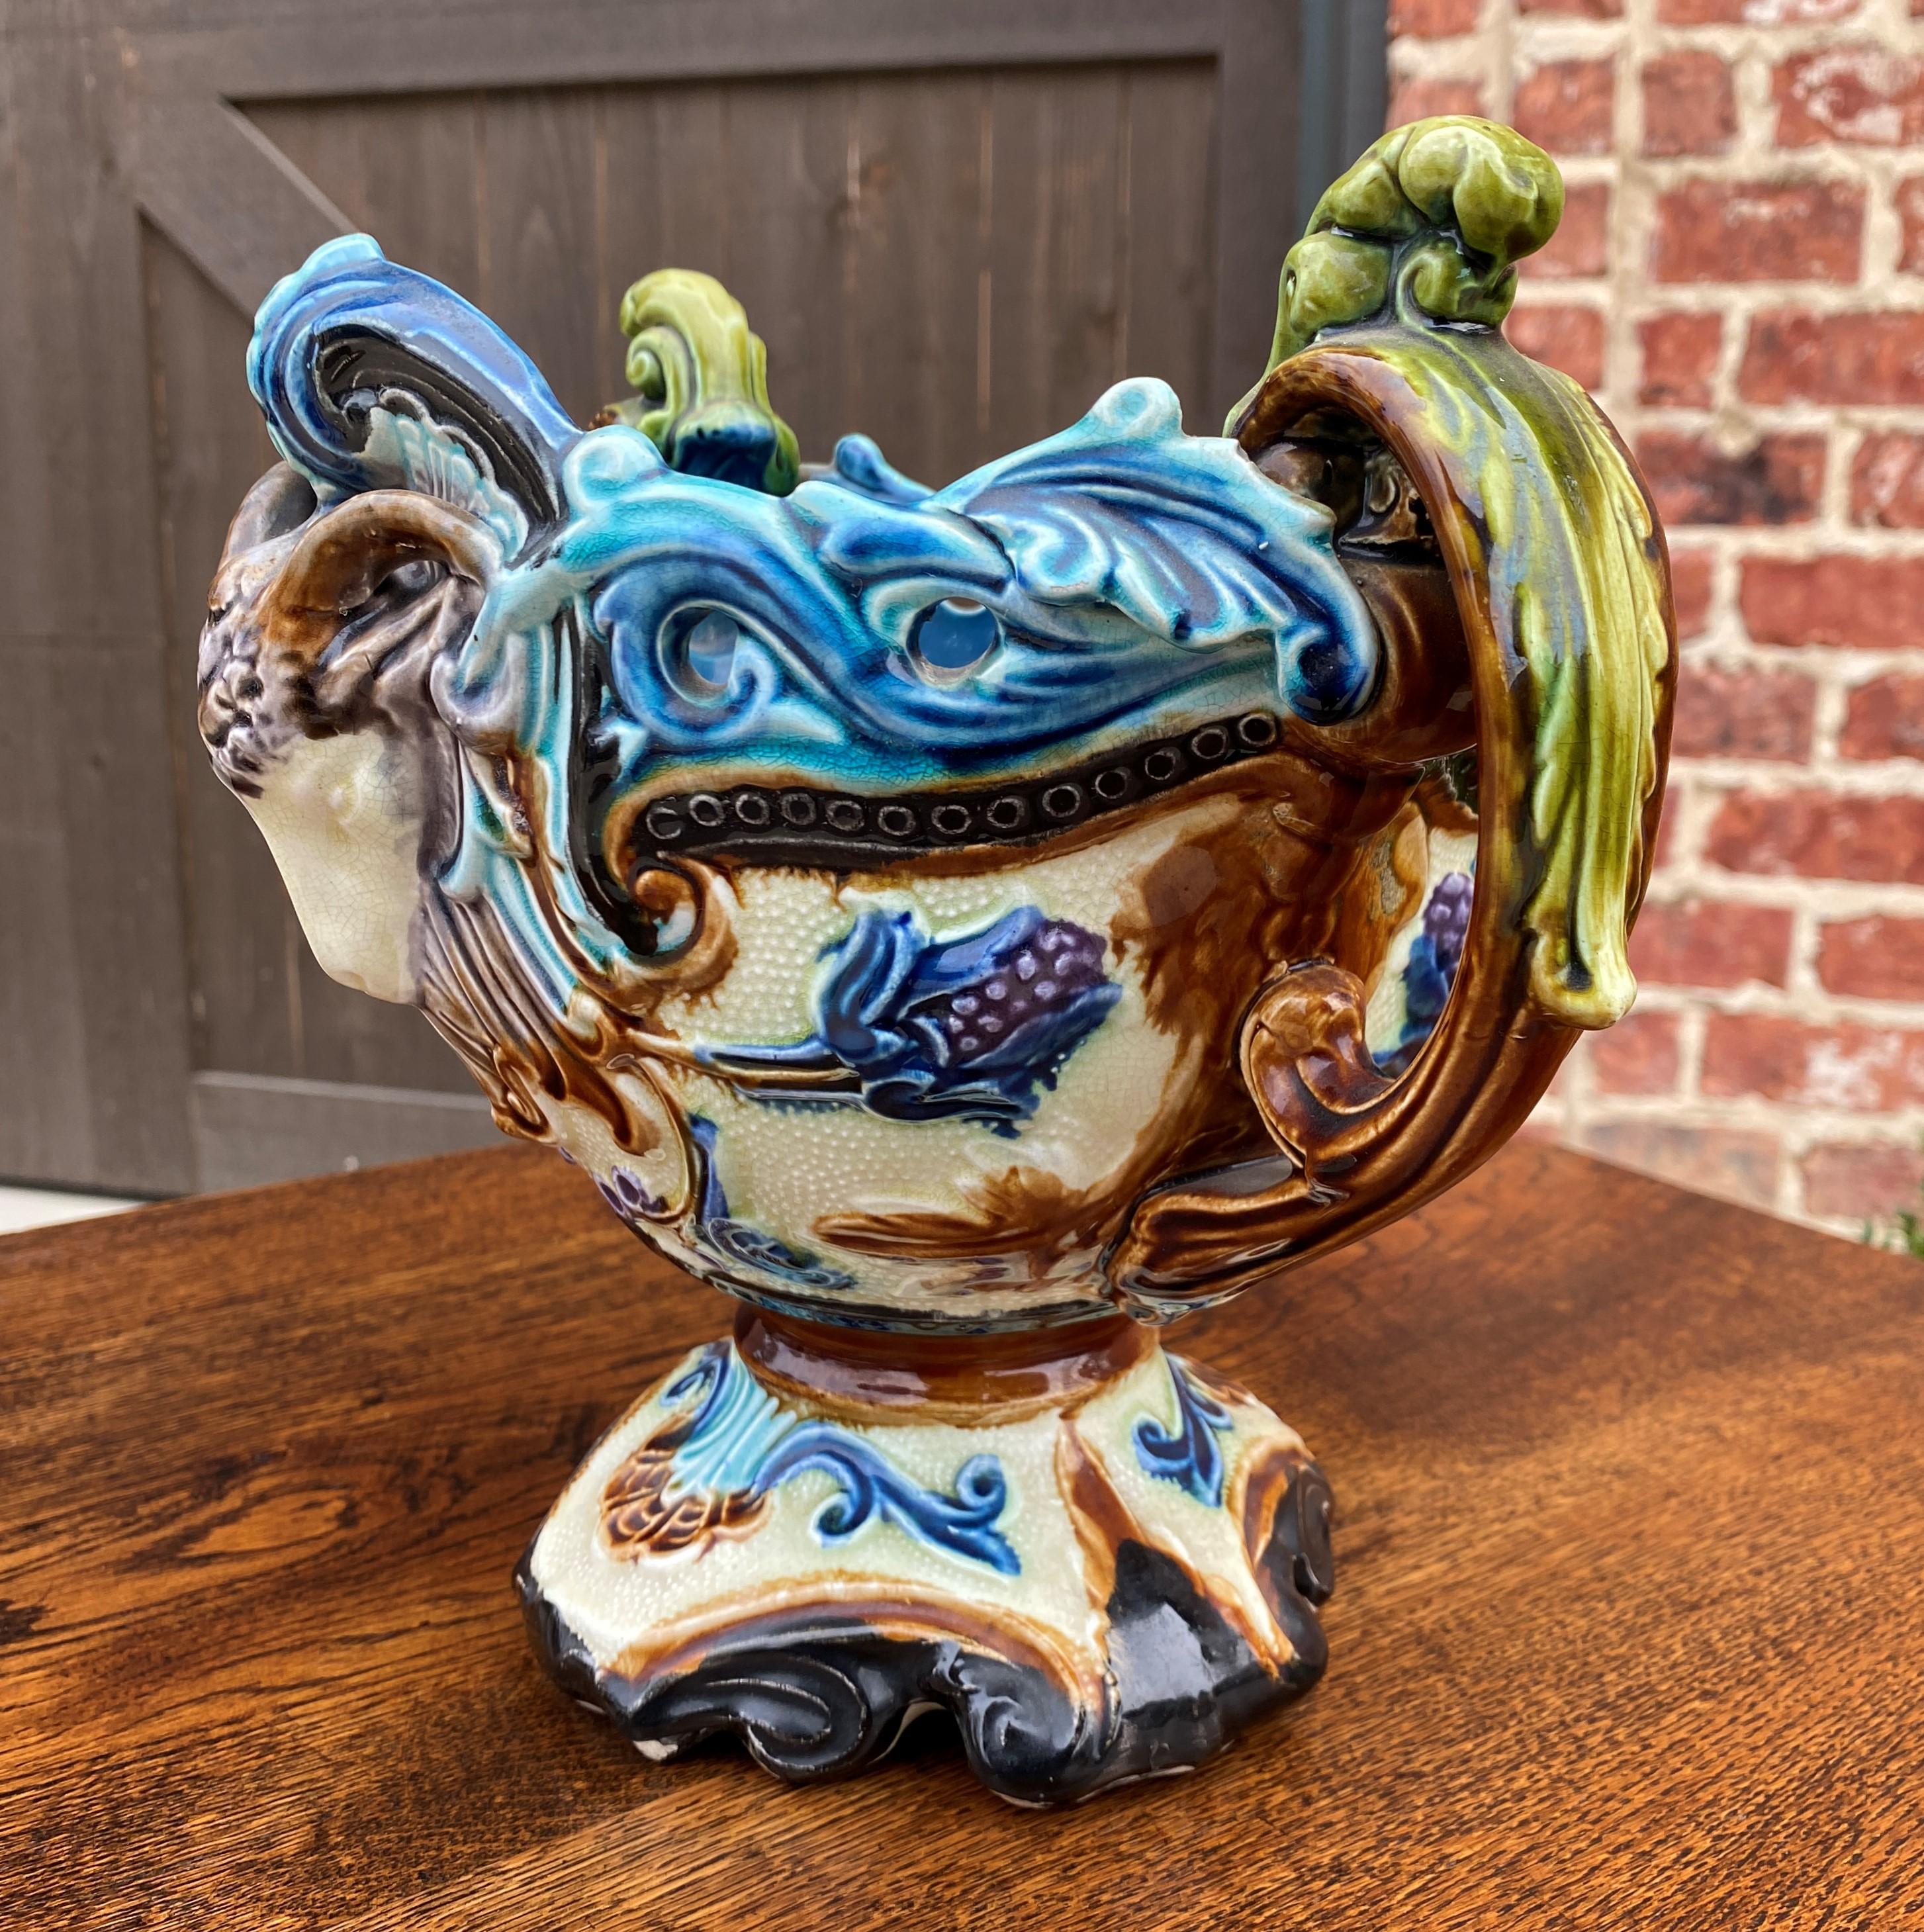 Gorgeous Antique French Majolica Footed Cache Pot, Planter, Jardiniere, Flower Pot or Vase~~c. 1900

Authentic French majolica planter or cache pot~~vibrant colors of teal, brown, gold, and green with ram heads on either side~~a must have for